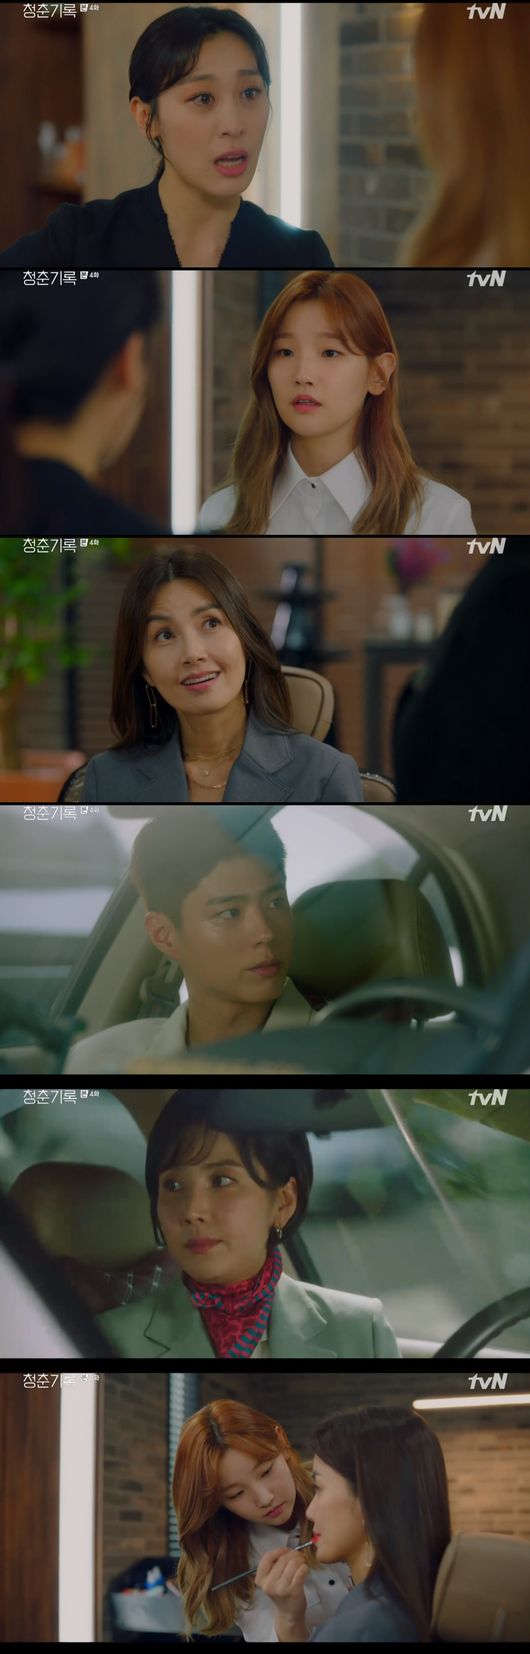 Park Bo-gum was vaccinated with a Cervical cancer.In TVN Record of Youth broadcast on the 15th, Won Hae-hyo (Wooseok) asked Ahn Jeong-ha (Park So-dam) to make up for a movie shooting scene while Park Bo-gum performed a Cervical Cancer Vacination.On that day, Sa Hye-joon and Won Hae-hyo rushed to the hospital at Kim Jin-woos SOS request.Kim Jin-woo recommended a Cervical cancer shot.Earlier, Hannah Jeter told me to get a Cervical Cancer shot to go to the world of 19 gold.Did you tell me to be a GFriend? asked Sa Hye-joon. Did you have a GFriend? Break up.I do not know who we are, said Sa Hye-joon. We seem to know. Won Hae-hyo said, Are you meeting Hannah Jeter?But Kim Jin-woo, who was proudly lying, said, No. So Won Hae-hyo said, I know its not crazy yet, but I know its not between family members.Sa Hye-joon told Won Hae-hyo that he signed with Lee Min-jae (Shin Dong-mi). So Won Hae-hyo said, What does Min-jaes sister know?So, Sa Hye-joon said, Your company did not refuse me, I refuse.Meanwhile, Stable Pearl (Geo Ji-seung) apologized to Desiigner for not going to education the day before; Stable said: Im sorry, I havent been educated and I havent received a phone call.But Desiigner sarcastically said, You really dont fit with me, Ill understand you, good boy.Kim Yi-young (Shin Ae-ra) made a reservation with Ahn Jeong-ha and appeared. Kim Yi-young said, Dont feel sorry. I will take it from Sam An Jeong-ha.I thought my son was more capable than comfortable, but I want to see it once because he says he is not a pearl. On this day, Sa Hye-joon went to the schedule with Lee Min-jae, who told Sa Hye-joon to sit in the back of the car, but eventually Sa Hye-joon moved to Lee Min-jaes side.I want to be a simple star, I drive well, said Sa Hye-joon, but Lee Min-jae said, The world is not like that. There is no such thing as human and retribution, said Lee Min-jae. I will keep my values. Lee Min-jae said, I respect value.But keep my rights to business. Sa Hye-joon received makeup from Ahn Jung-ha. Ahn Jung-has senior Desiigner kept notice. Sa Hye-joon asked, Im a lot confused by Jin-ju Sam.Dont let it in, its my fight, said Stable.You should drink in front of me in the future, its so cute, said Sa Hye-joon, who stabilized. I hear a lot of such things.Won Hae-hyo said, I want you to make up a movie this time. So, Sa Hye-joon said, I am coming out of the movie.If you do it, you will do it. Sa Hye-joon said, It is against the virtue of the prize. Won Hae-hyo said, Why did I ask for the prize?Pearl Desiigner deliberately spilled a drawer that An Jeong-ha had arranged, saying, If only one person has to stay, thats definitely me.: TVN Record of Youth broadcast capture